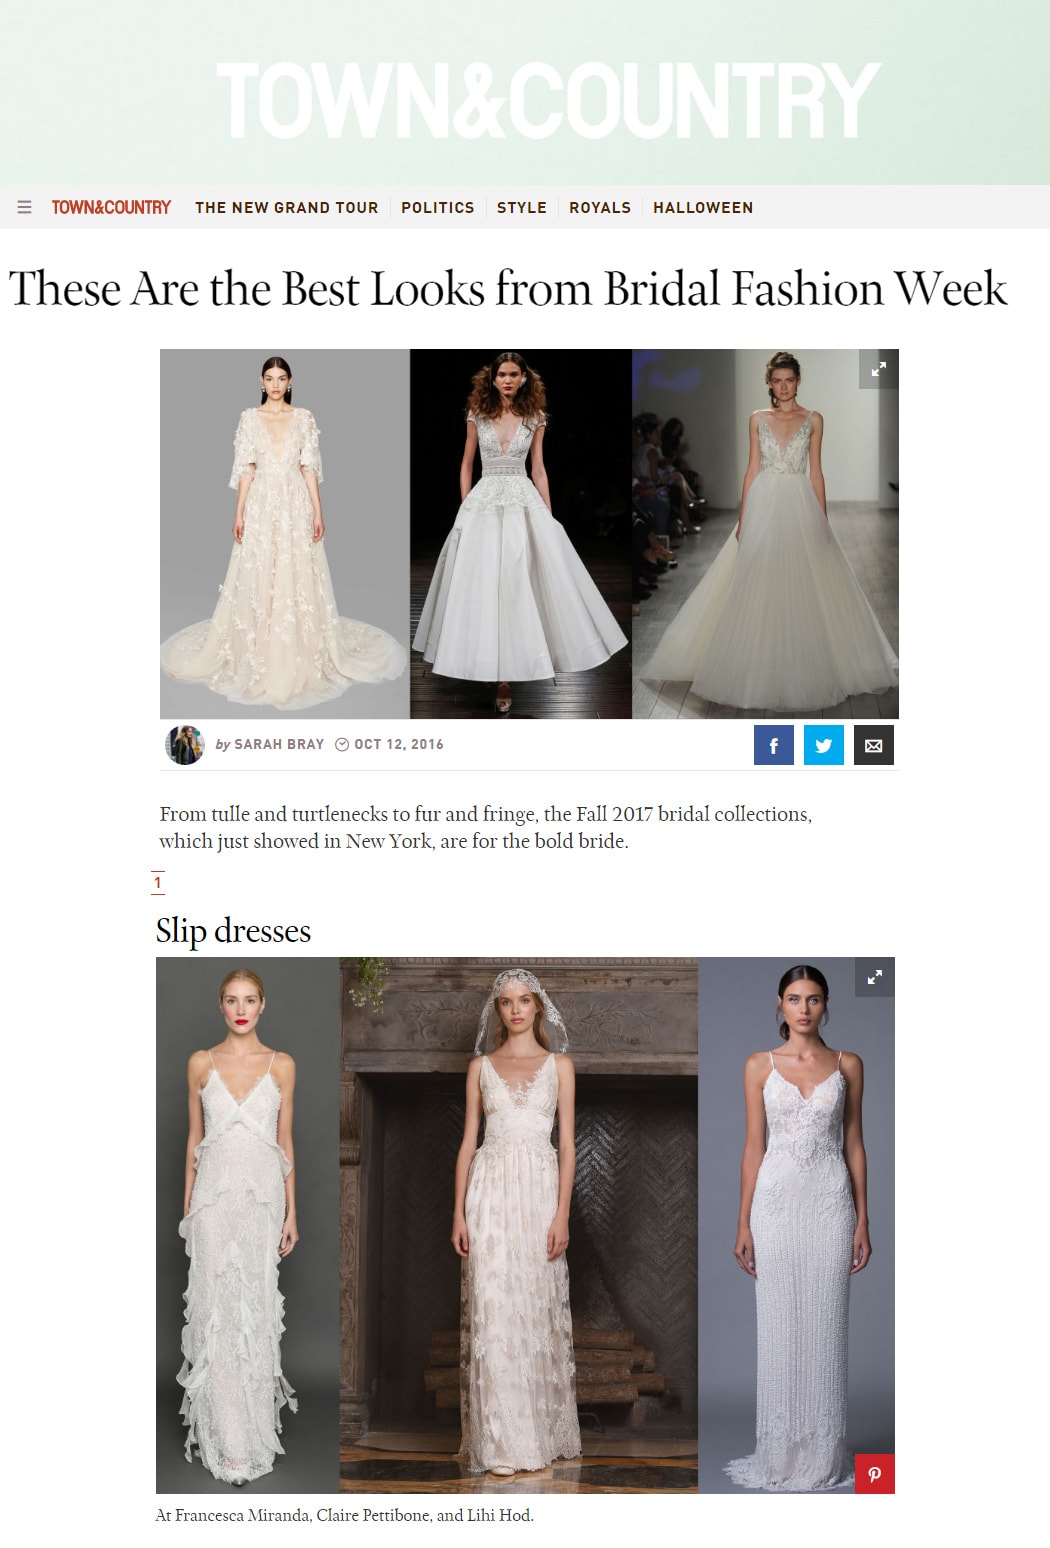 Town & Country: These Are the Best Looks from Bridal Fashion Week